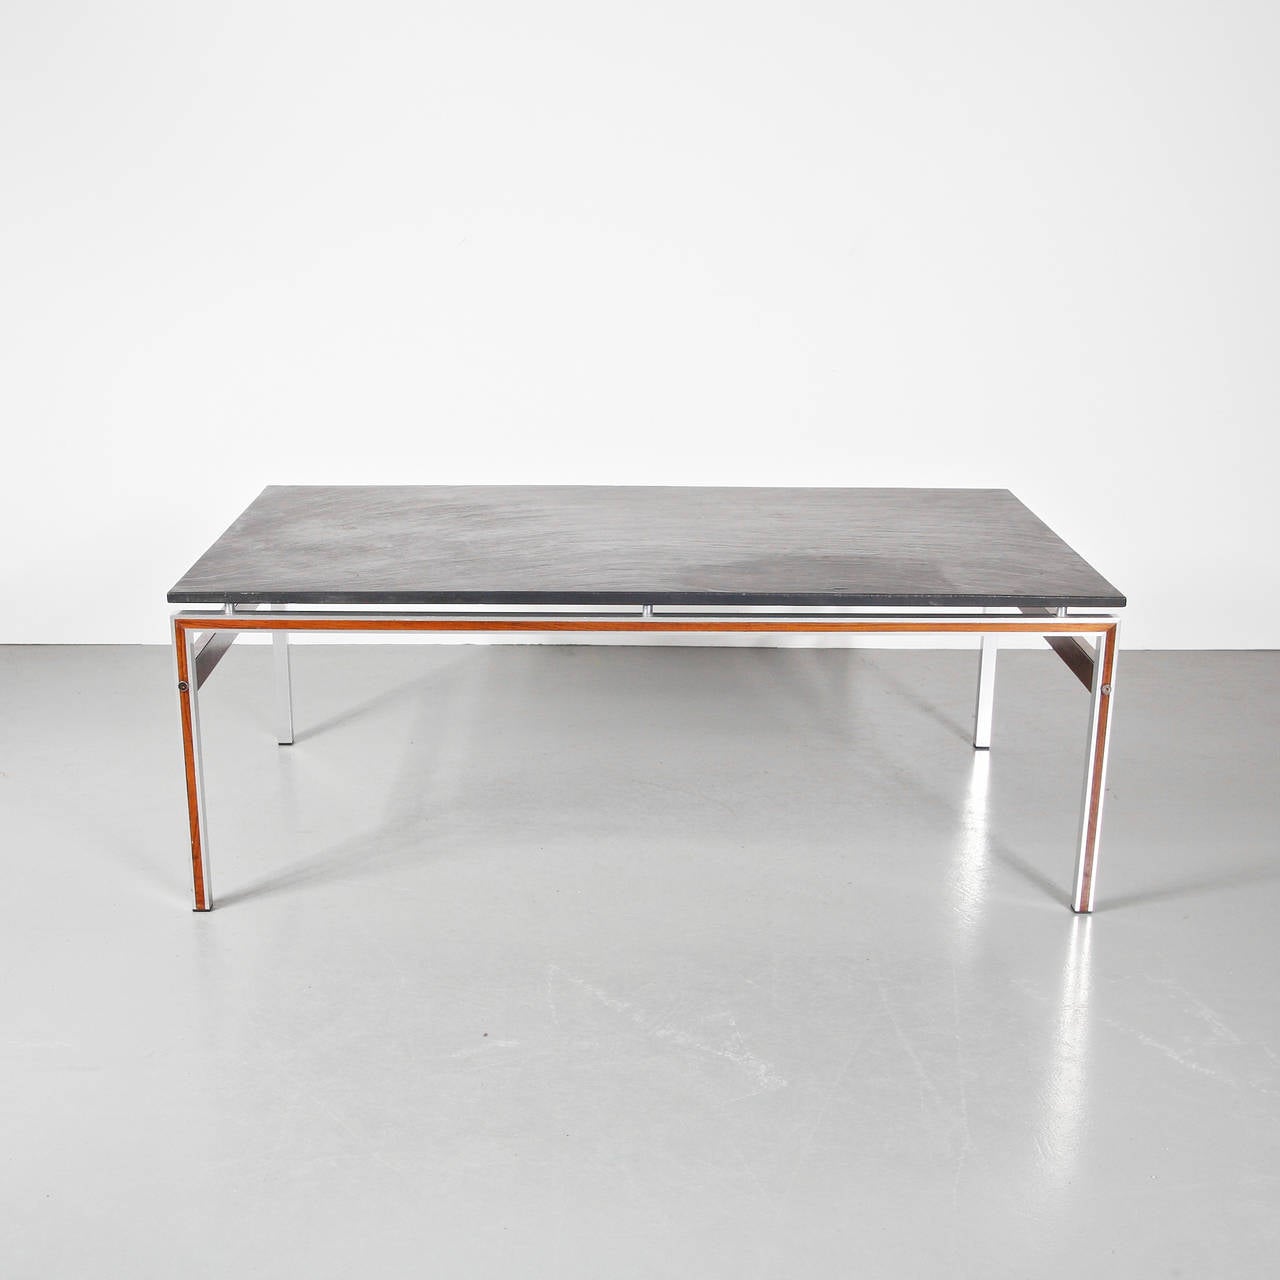 Stunning coffee table with slate stone top, manufactured in Denmark around 1960.

This eye-catching piece has a beautifuly crafted wooden with chrome metal base and a slate stone top of the highest quality. It has a very unique appearance and